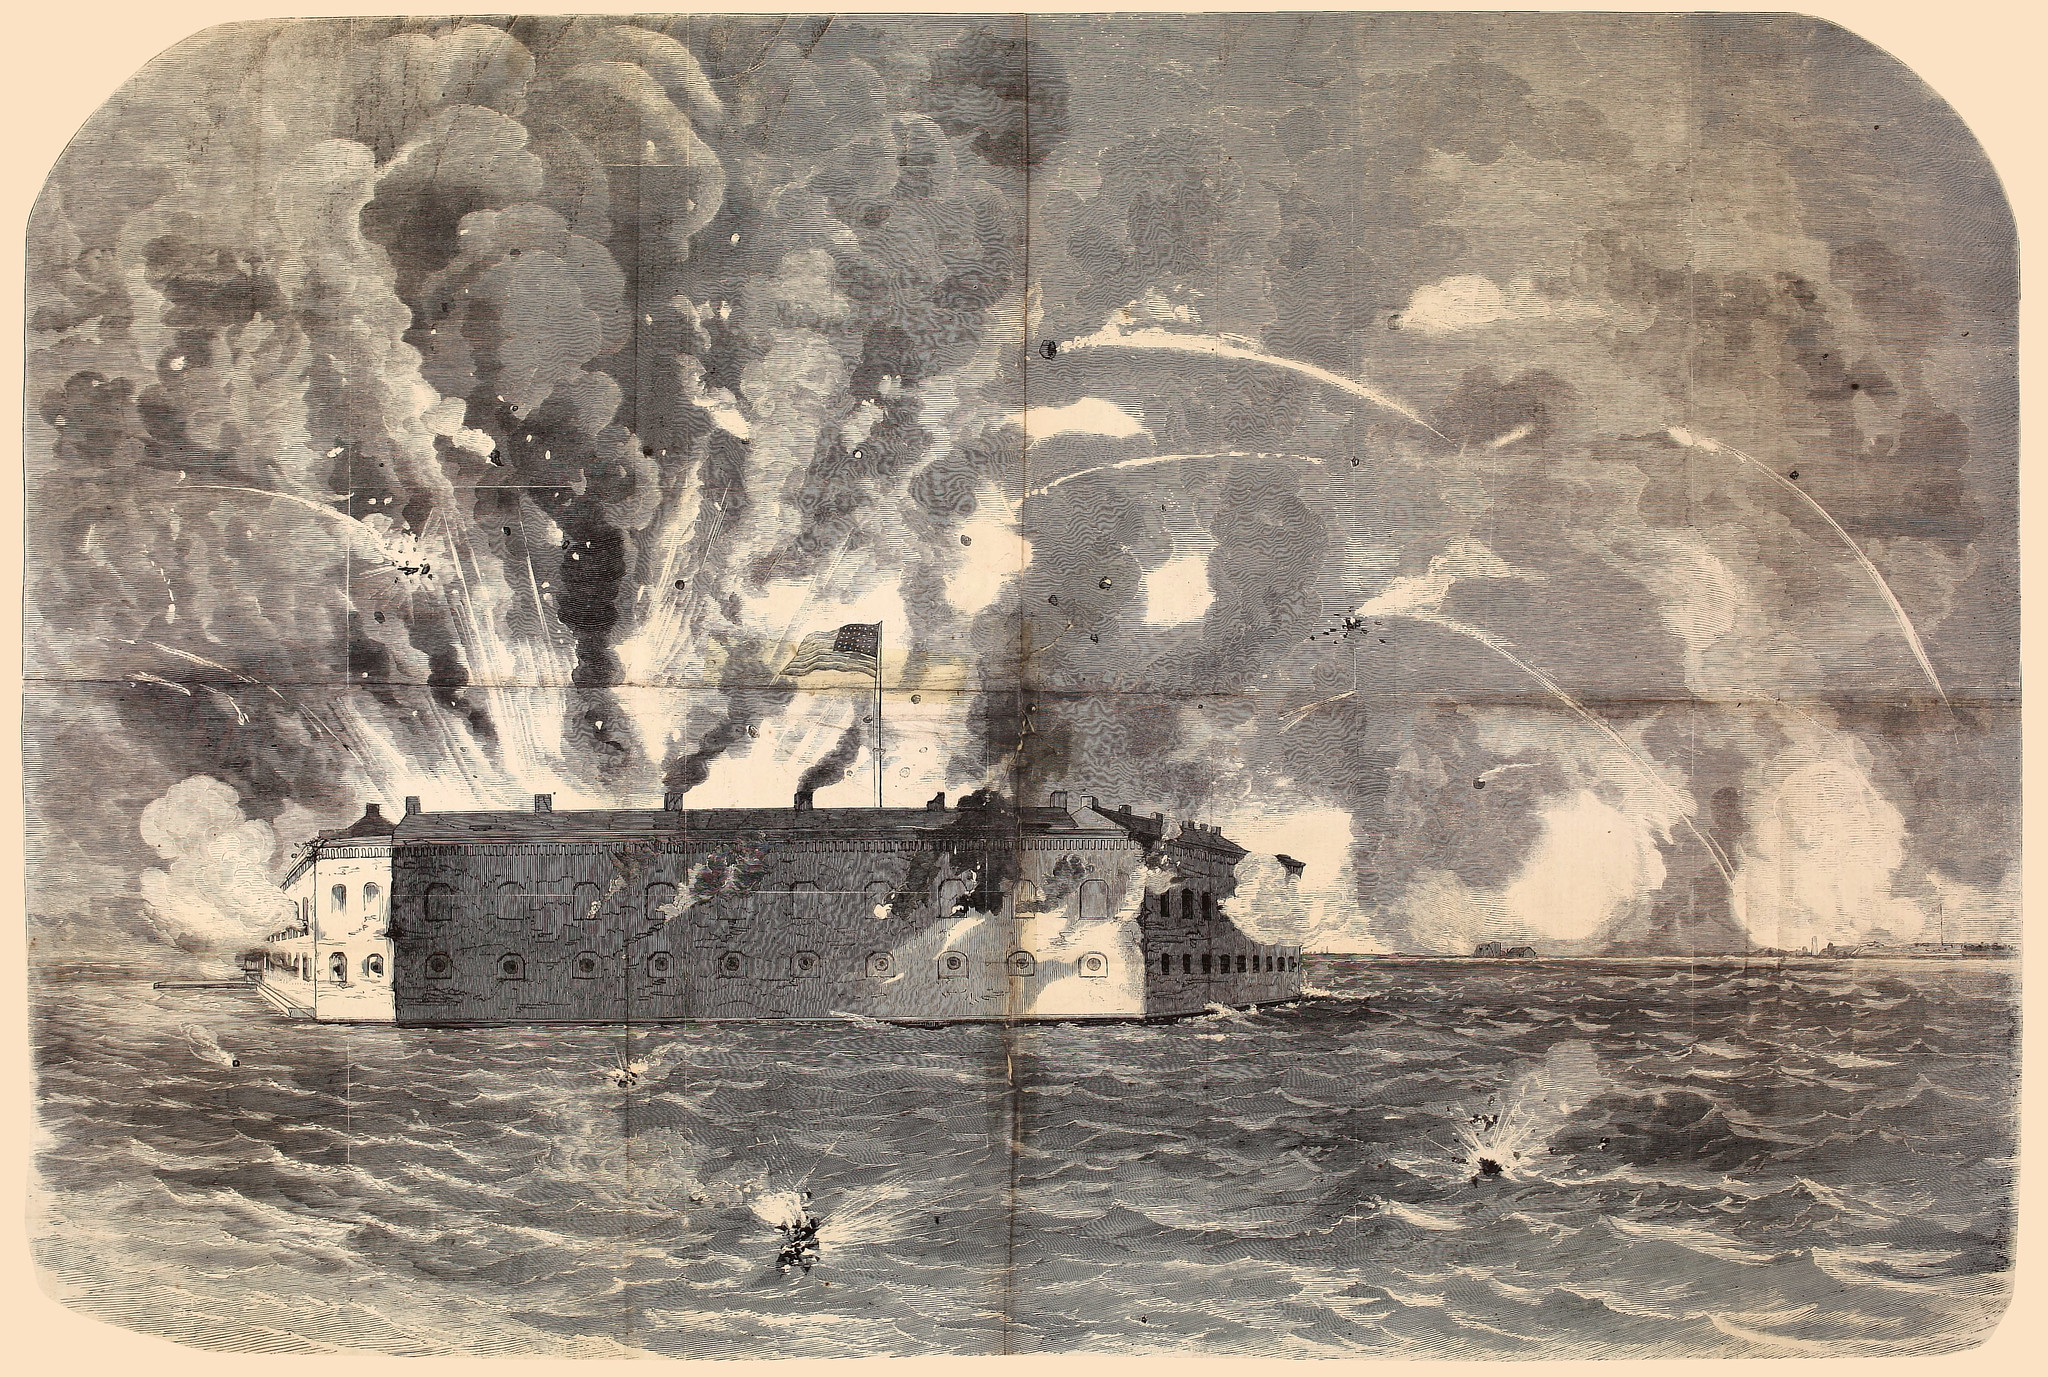 The Bombardment of Fort Sumter, Charleston Harbor, the 12th and 13th of April, 1861—This Picture was taken by our Special Artist, shortly before the Surrender of Major Anderson, when the Officers' Quarters were on Fire.